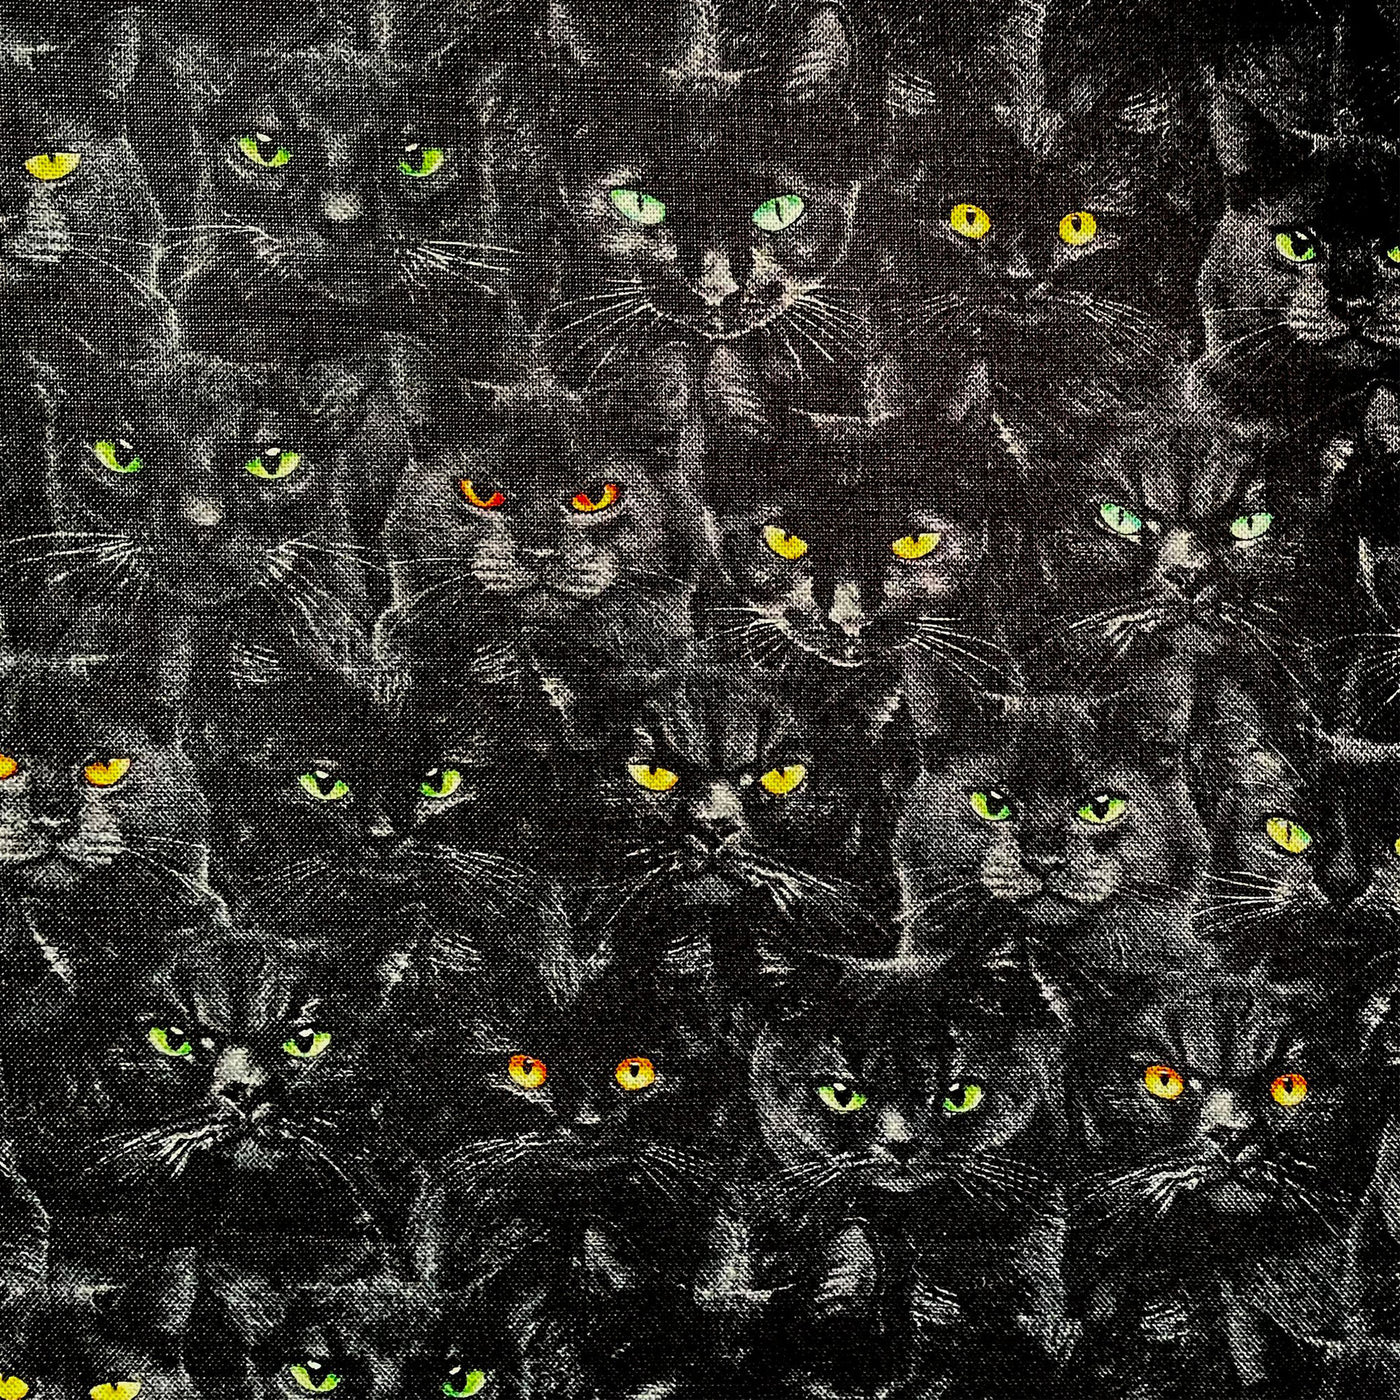 Lucky Black cats in rows on our handmade bandana 100% cotton.